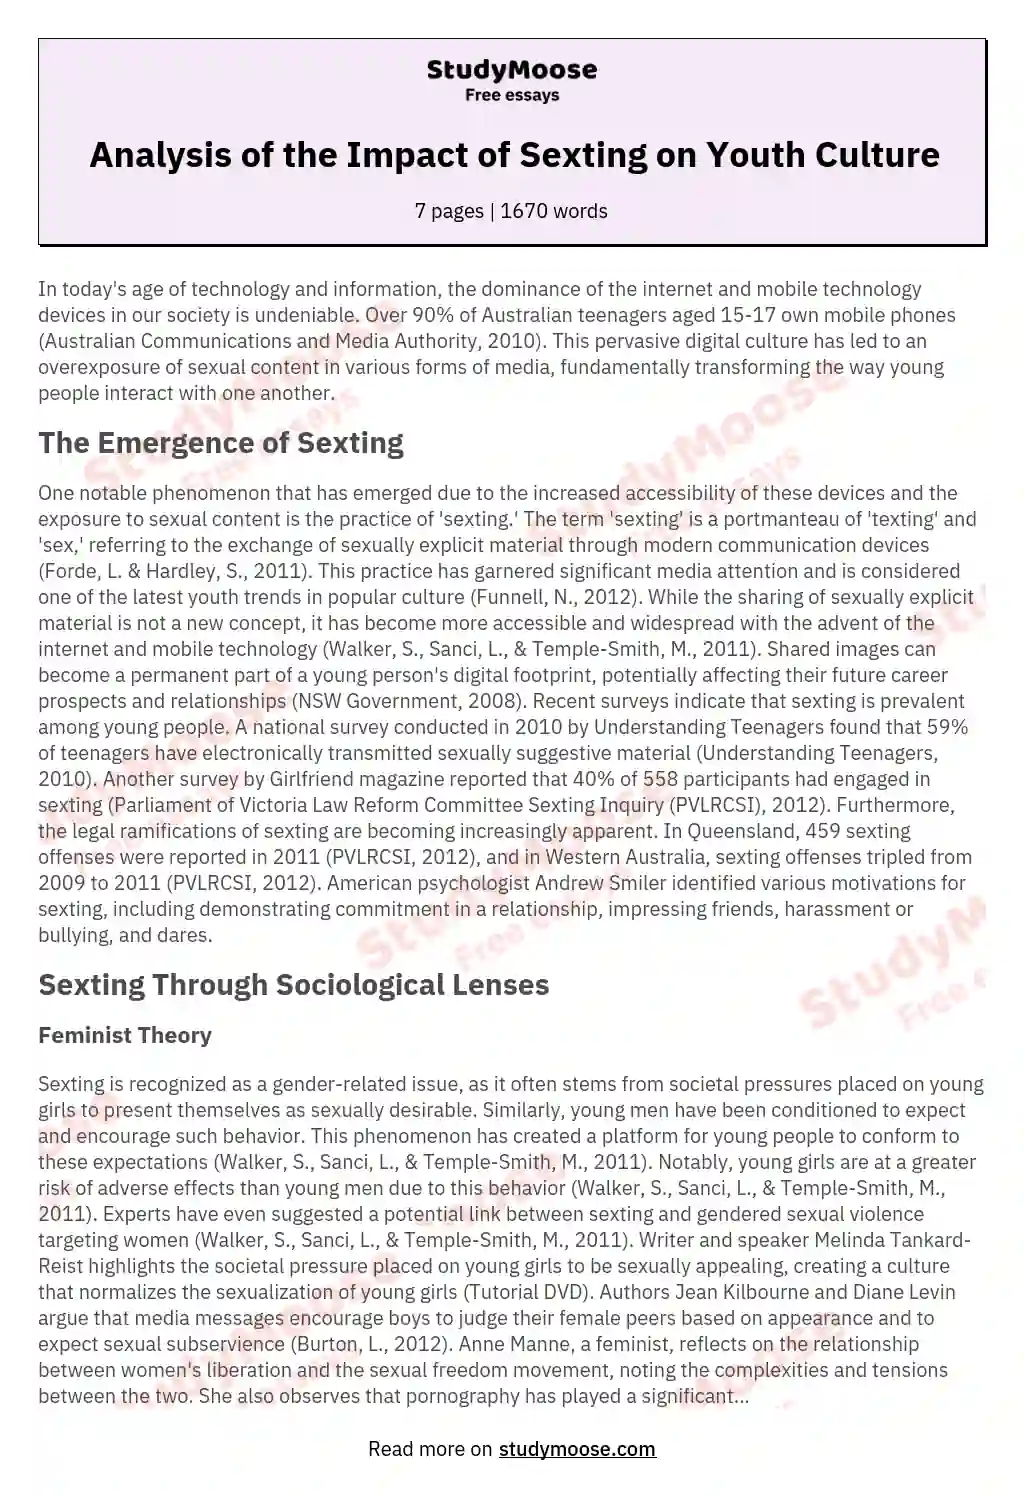 Analysis of the Impact of Sexting on Youth Culture essay